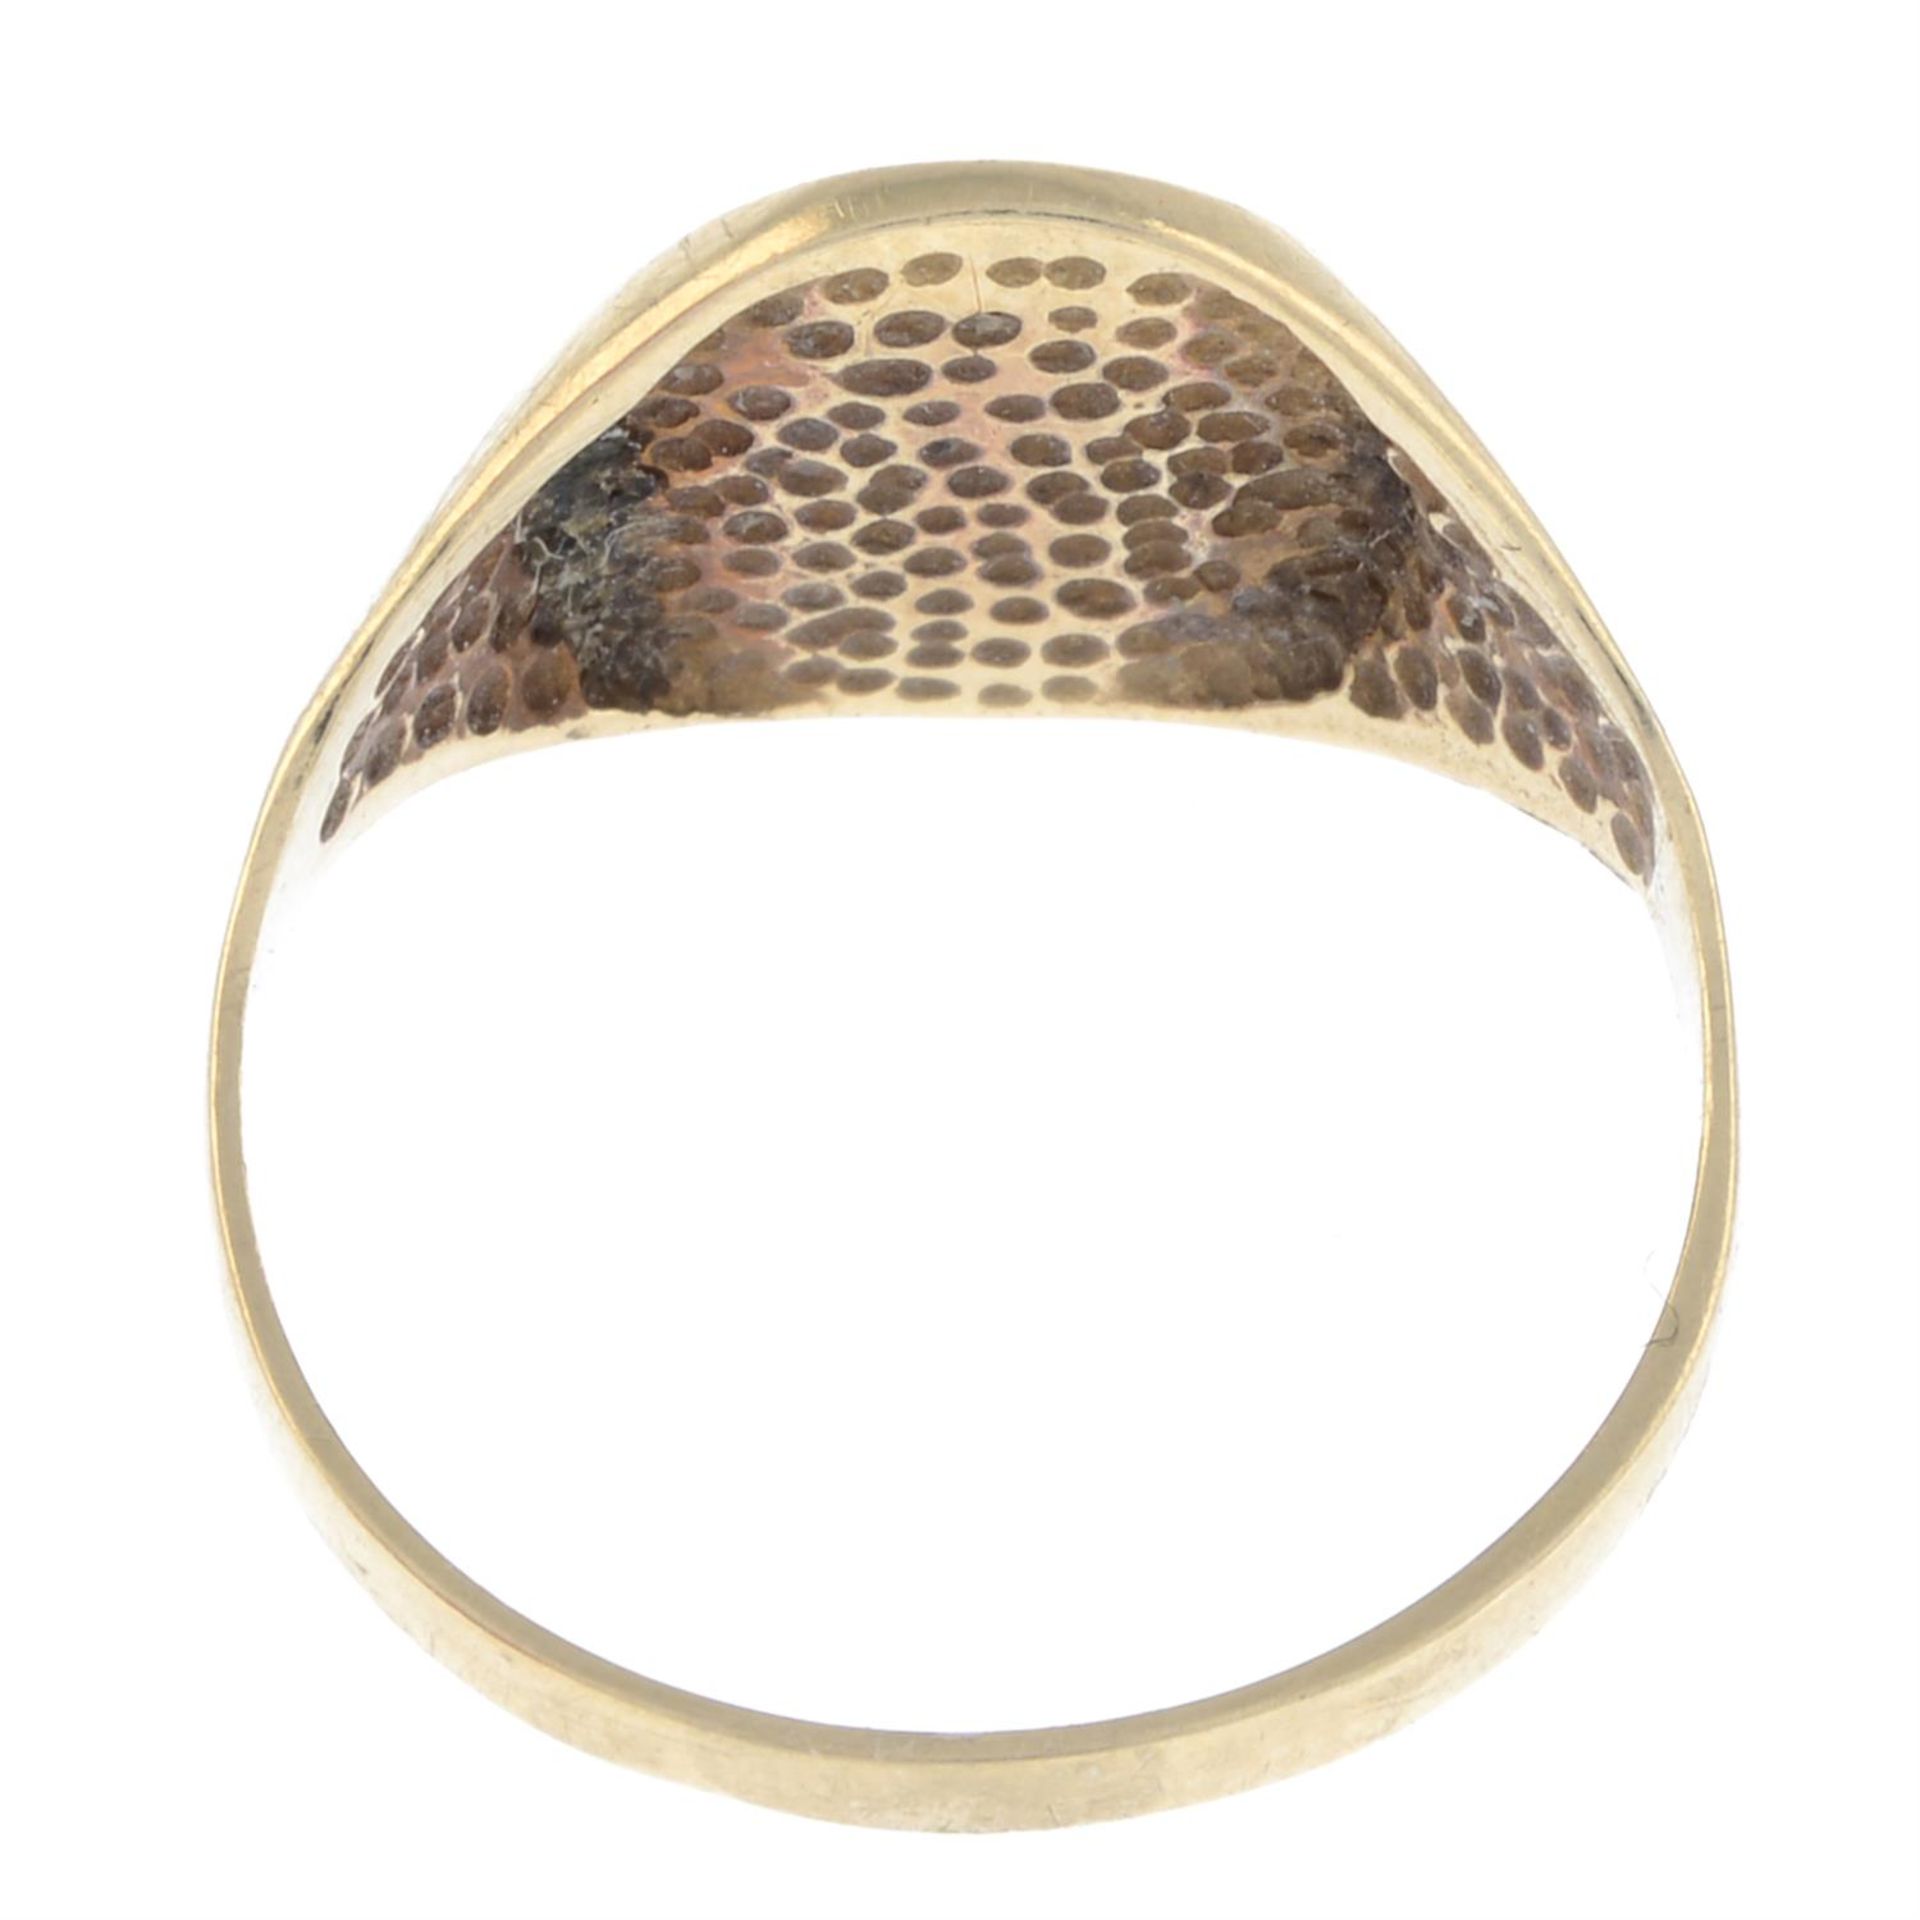 9ct gold 'Prince of Wales's Feathers' signet ring - Image 2 of 2